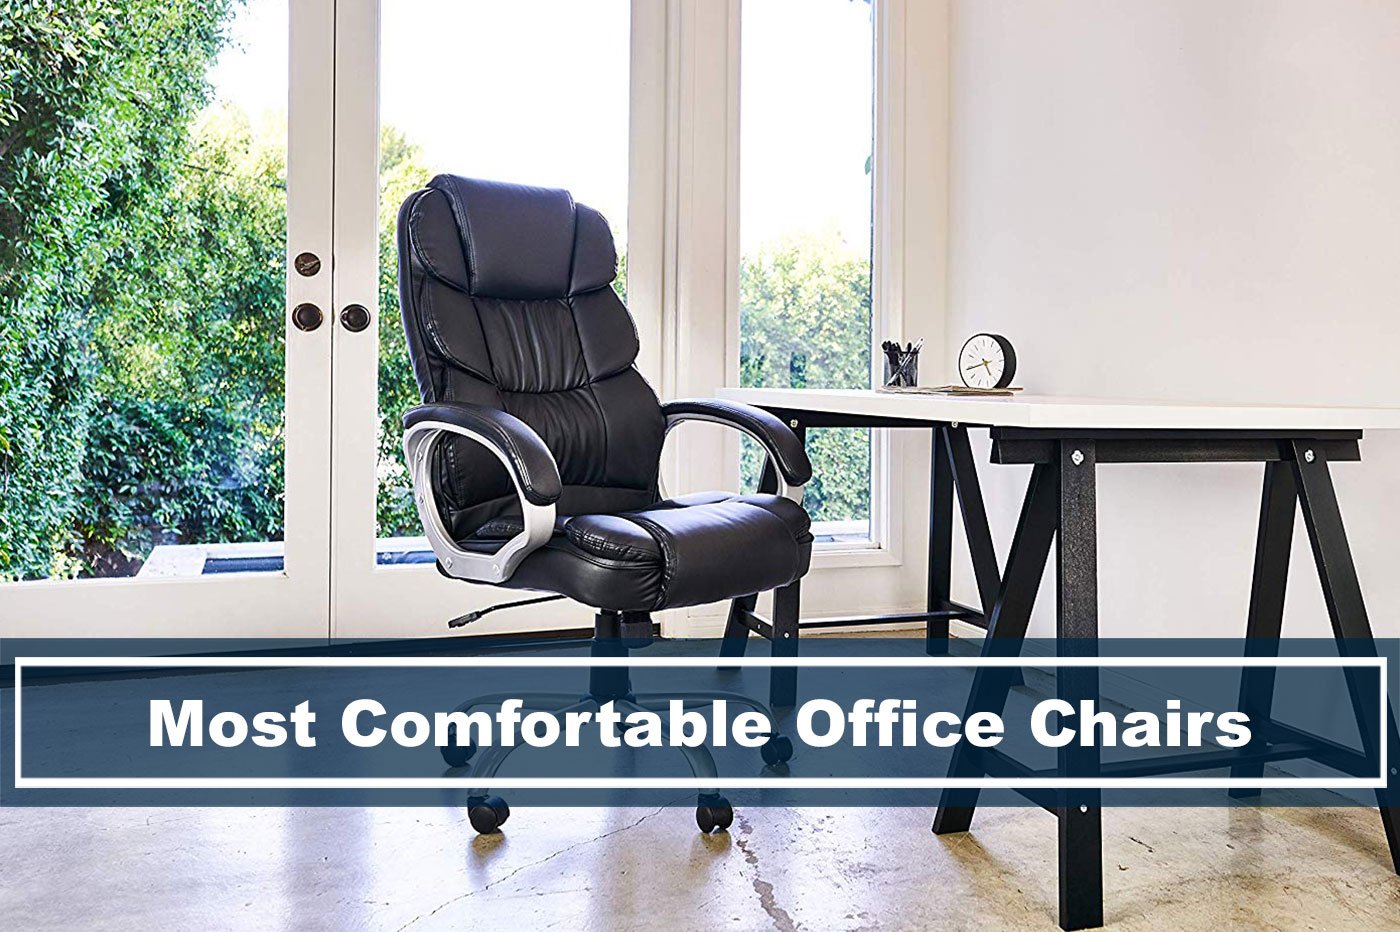 10 best comfortable office chairs reviewed for your office